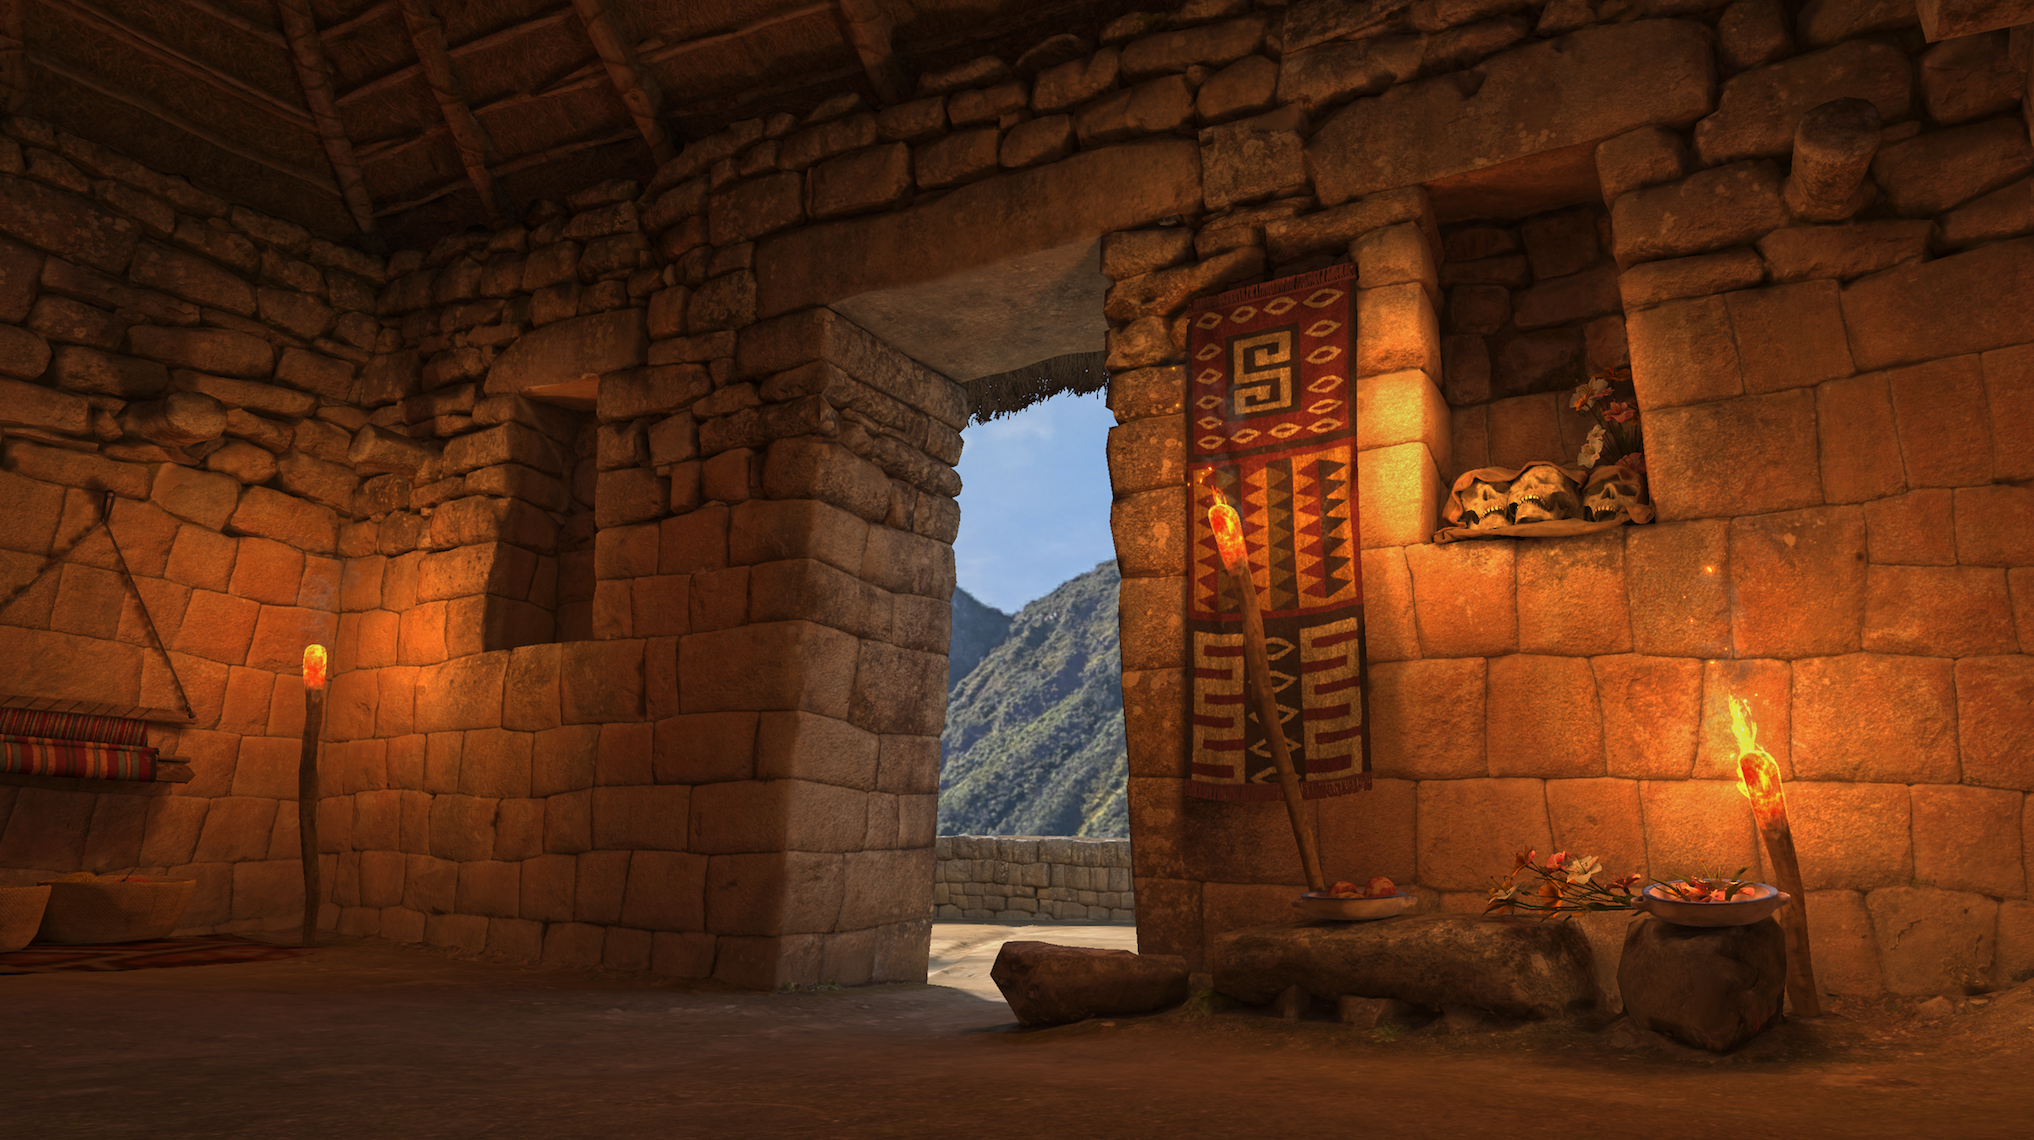 photo of Image taken from National Geographic Explore VR Level 2, Machu Picchu.